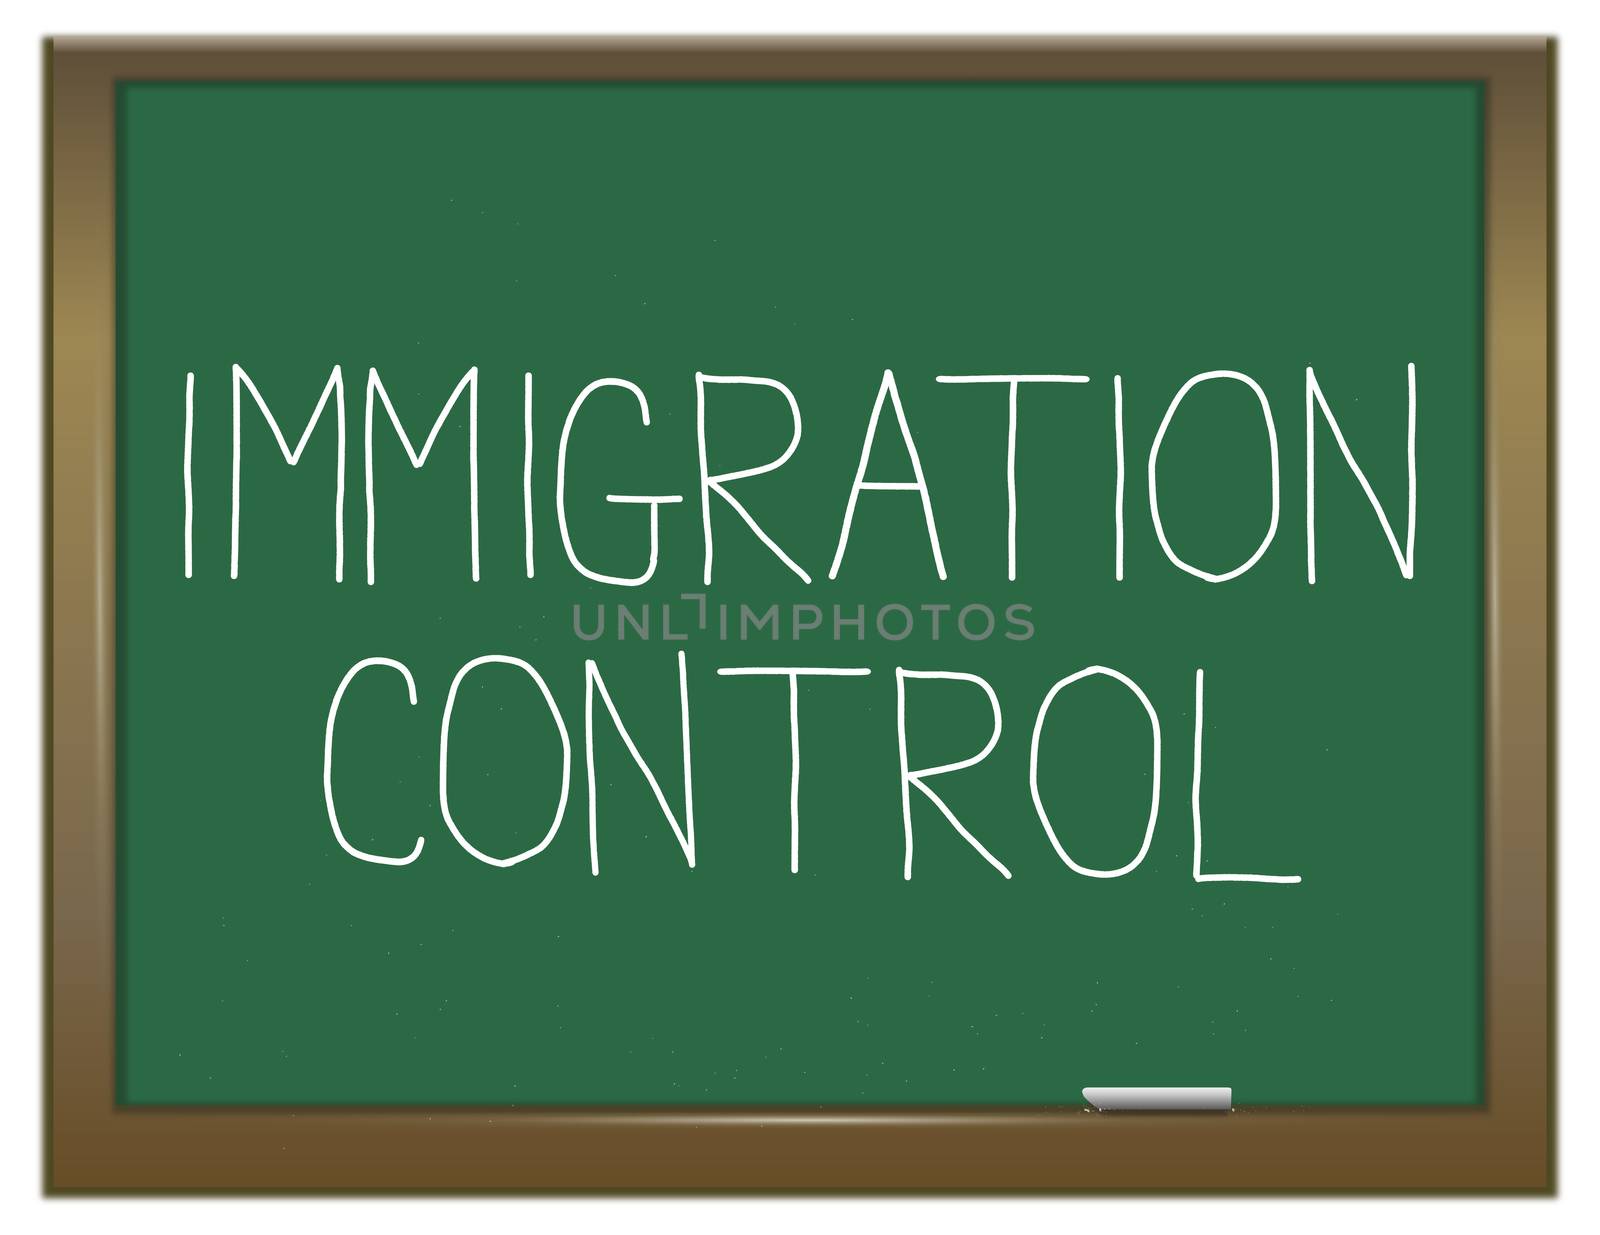 Illustration depicting a green chalkboard with an immigration control concept.